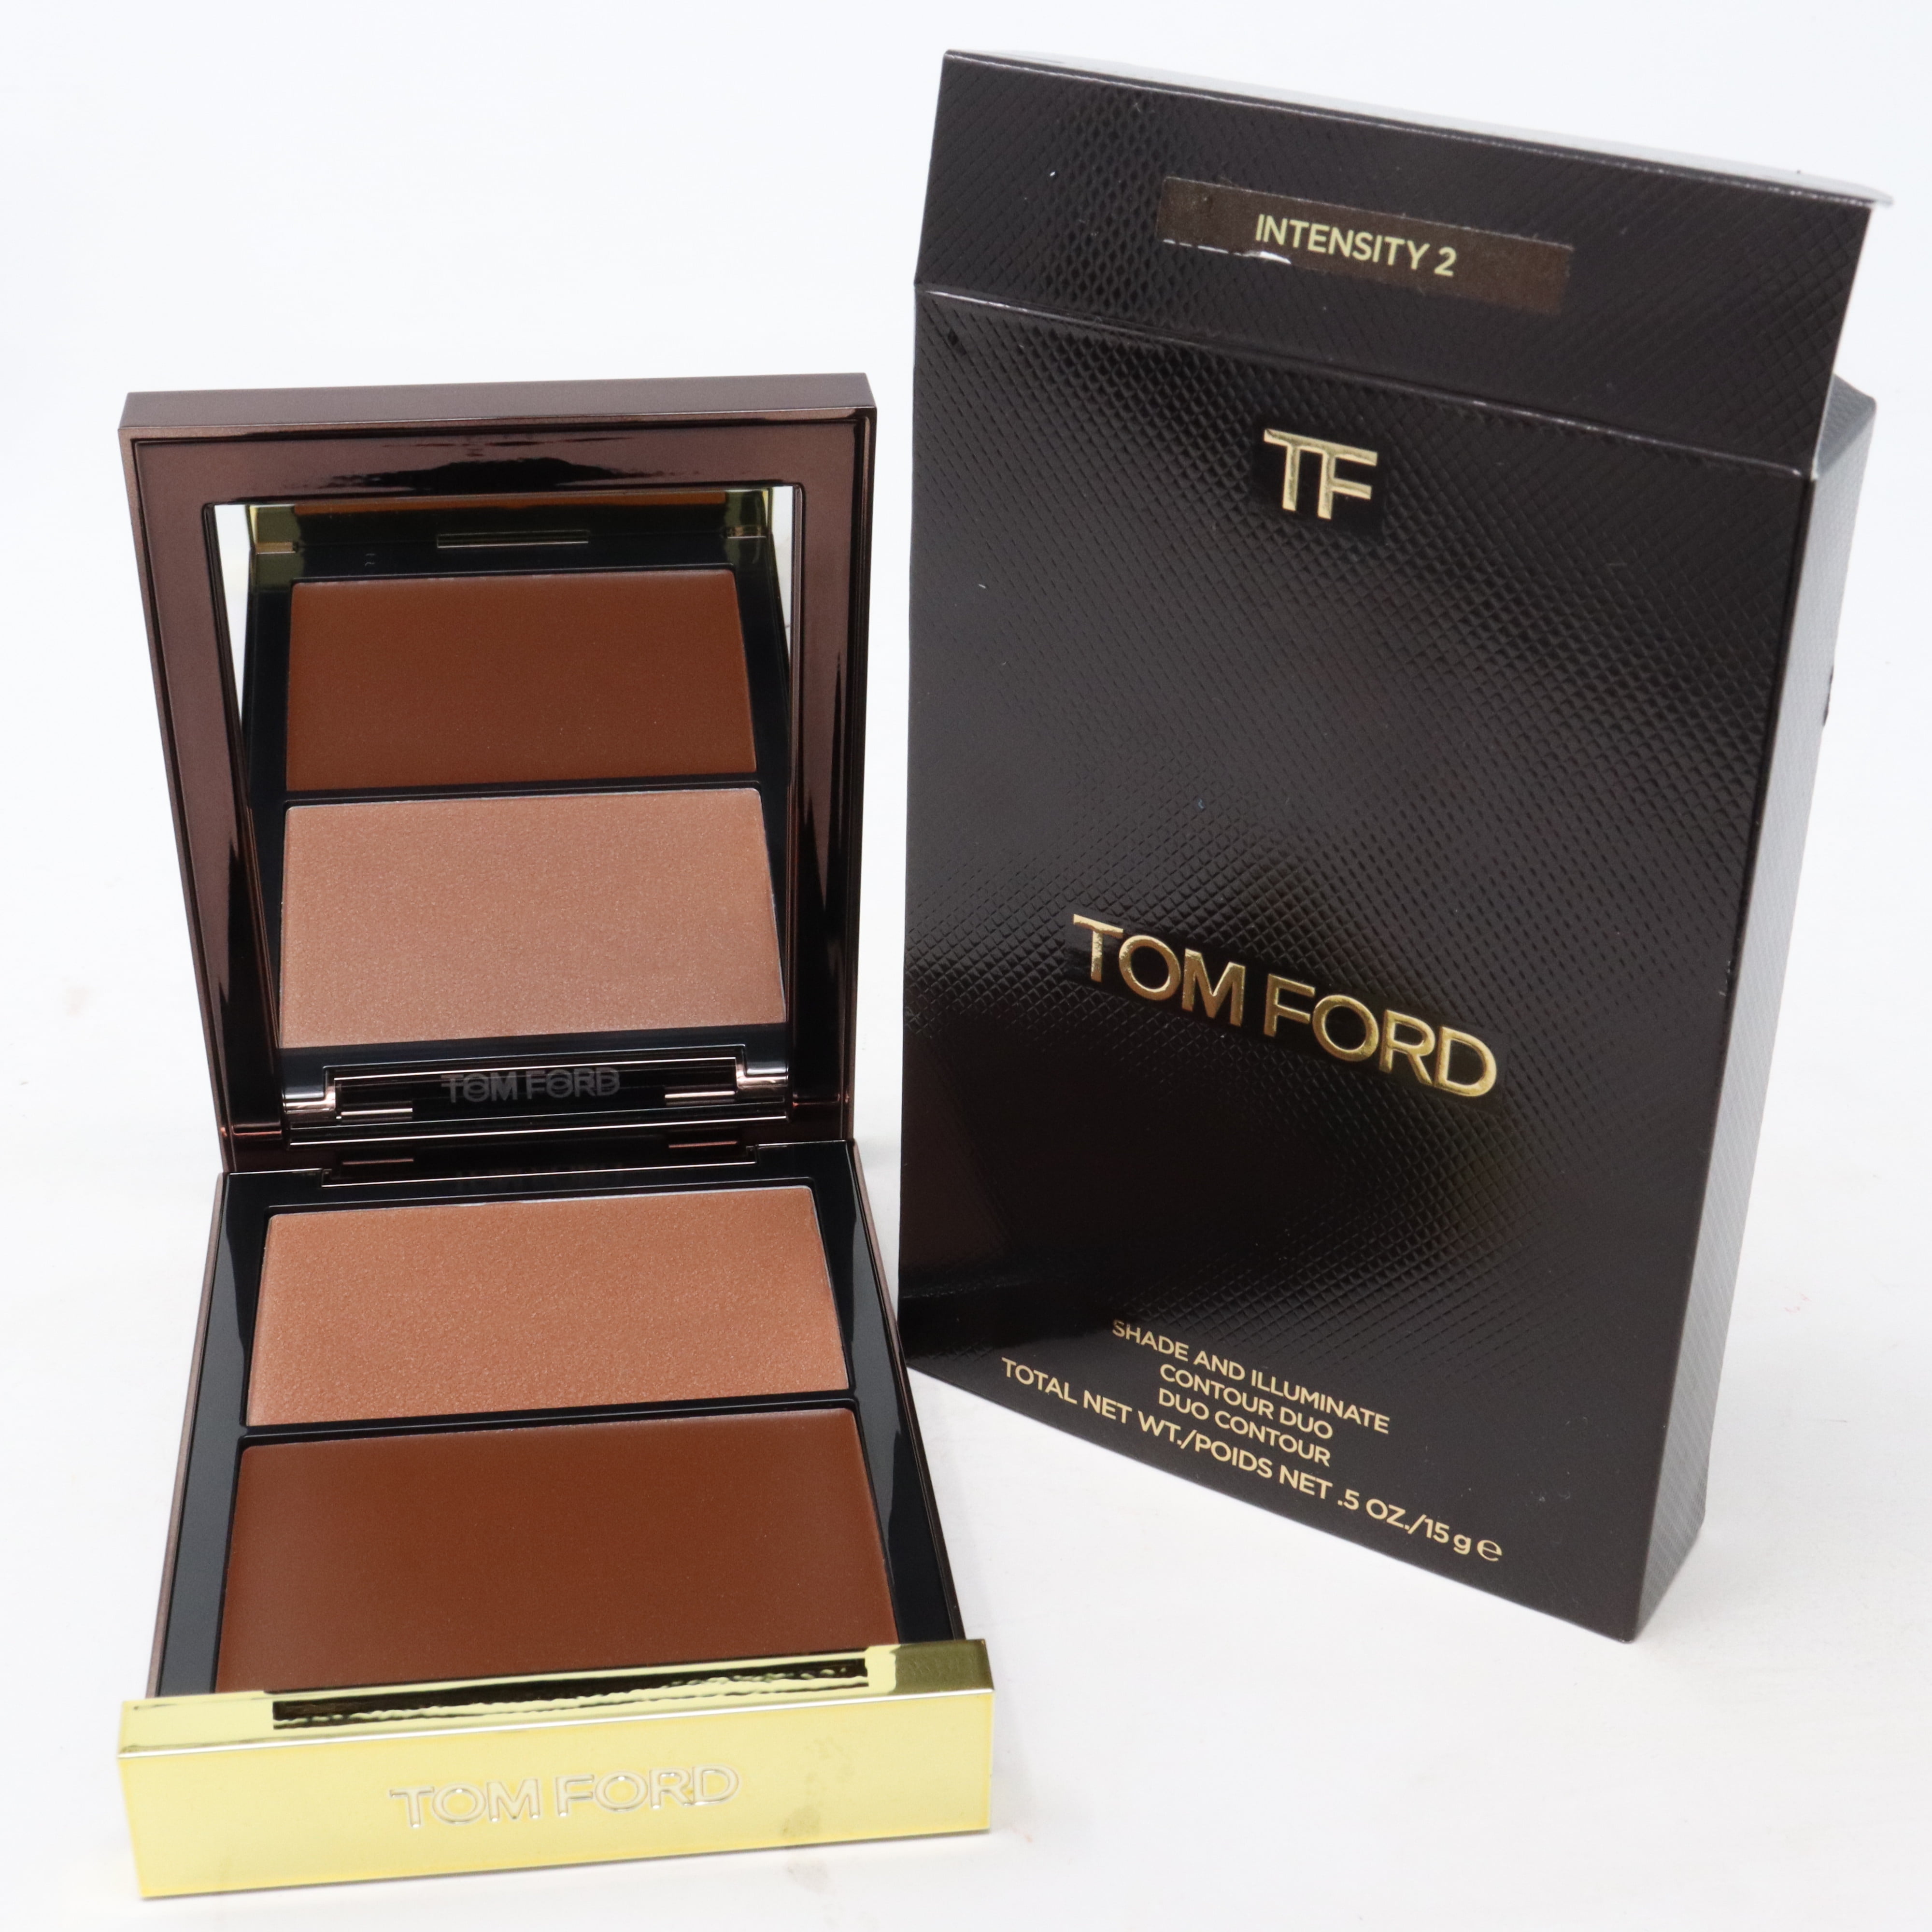 Tom Ford Shade And Illuminate Contour Duo Intensity 2 0.5oz/15g New ...